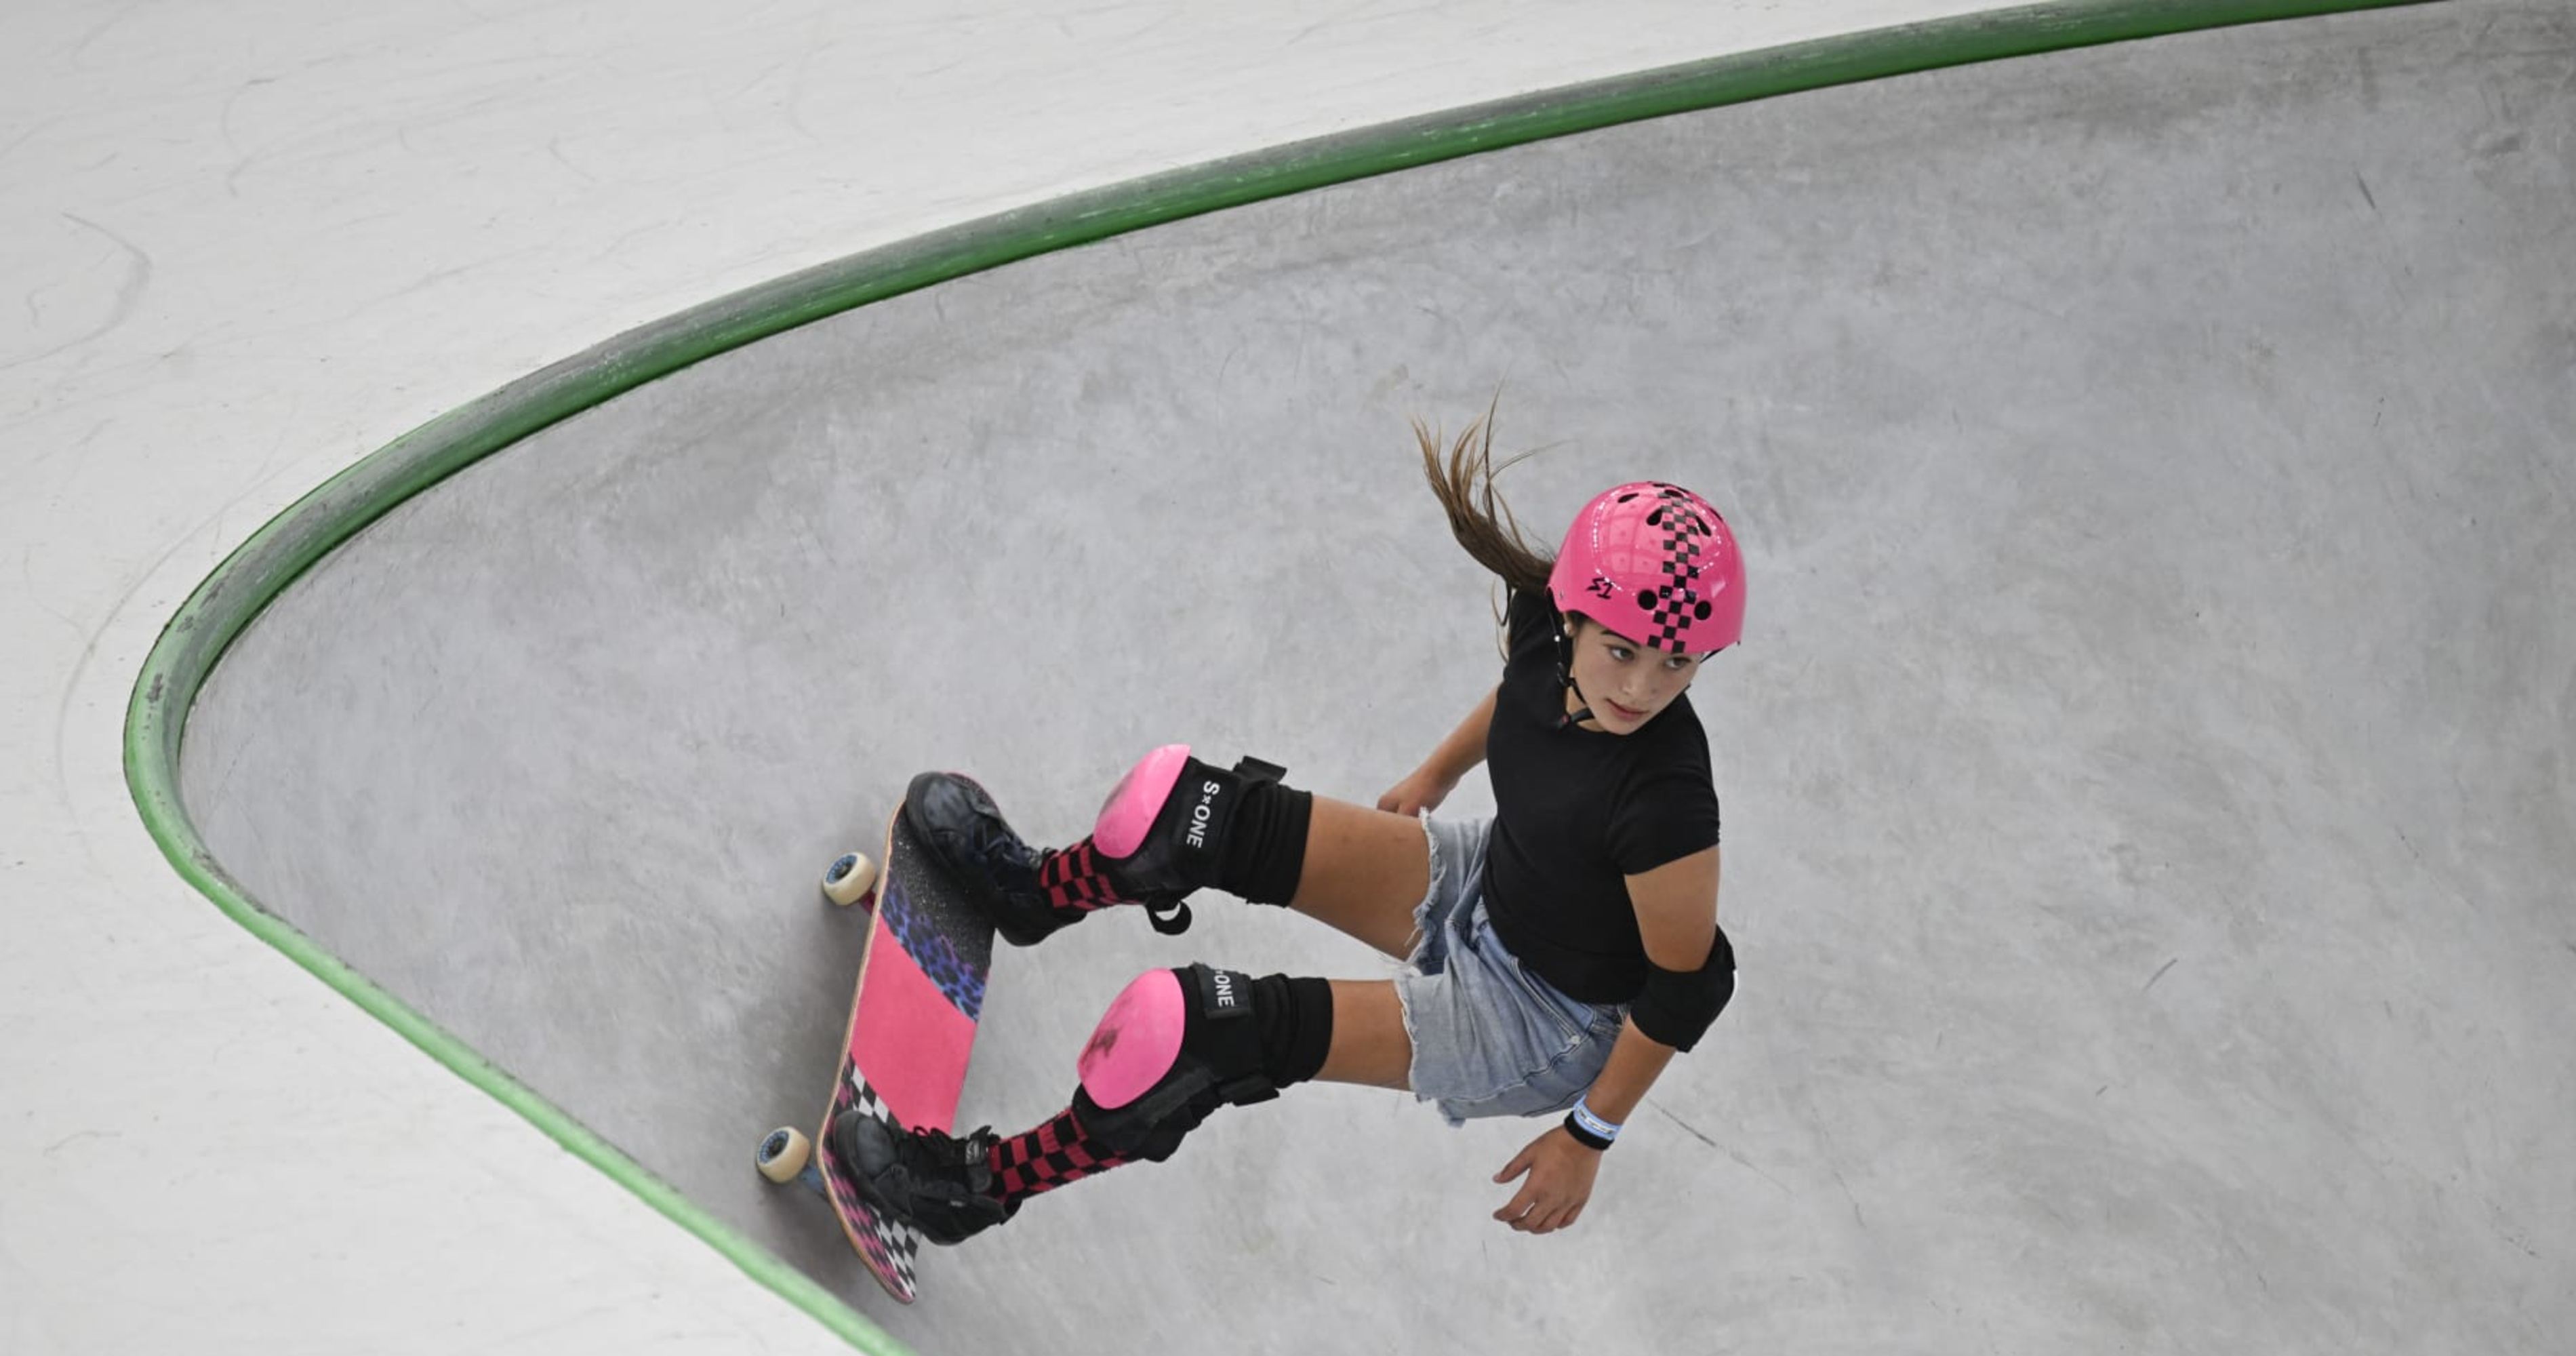 Video: 14-Year-Old Arisa Trew Becomes 1st Female Skateboarder to Land 900